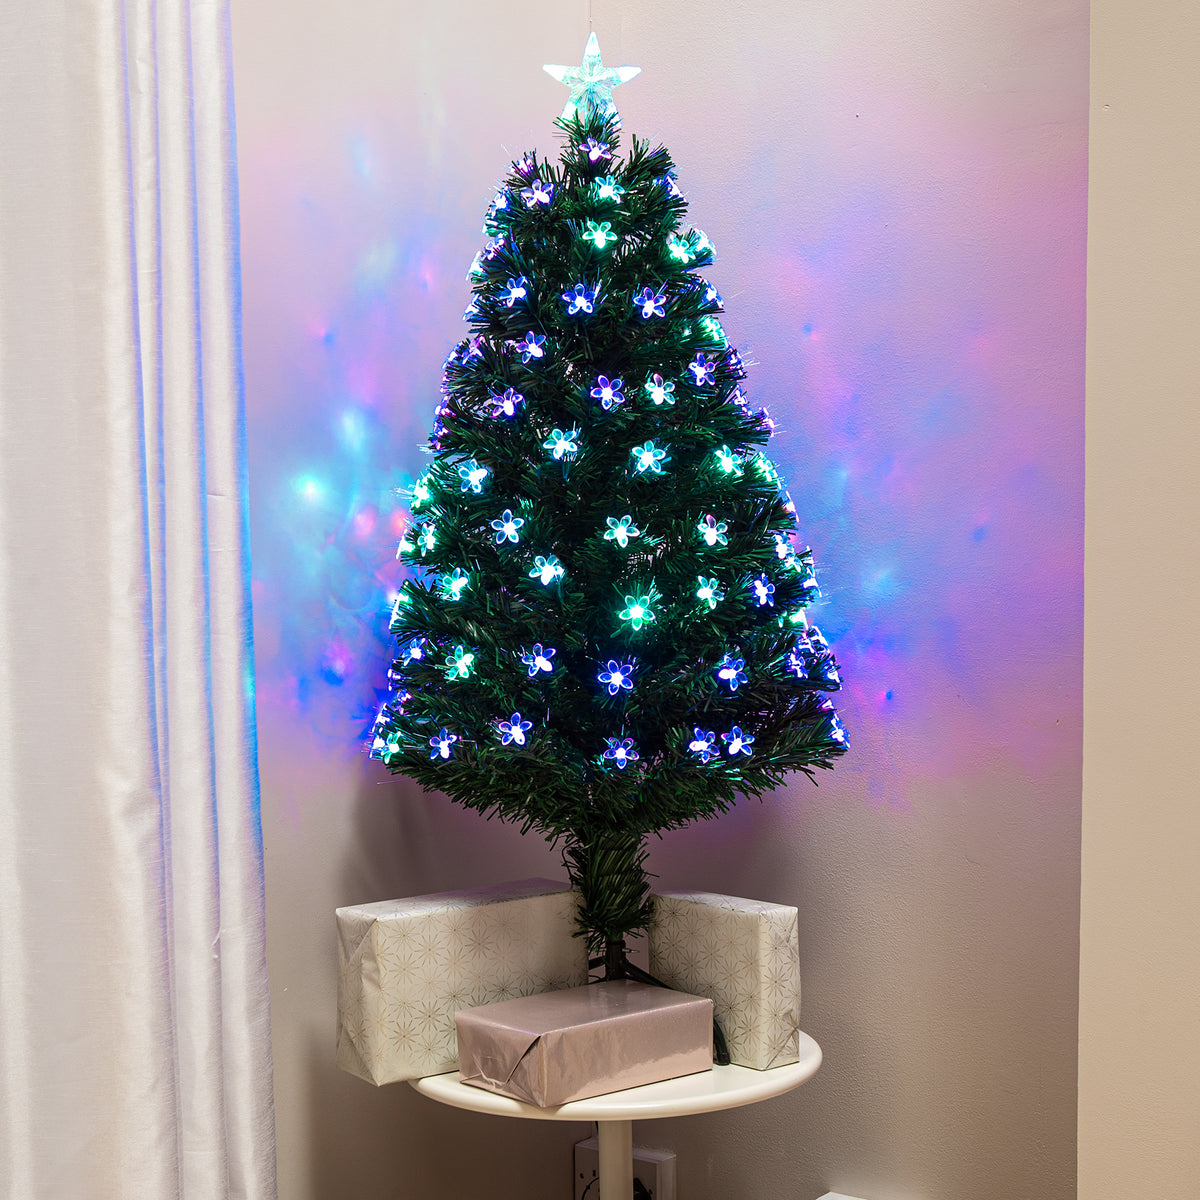 Green Fibre Optic Christmas Tree 2ft to 6ft with Multi Coloured Fibre Optics and Flowers